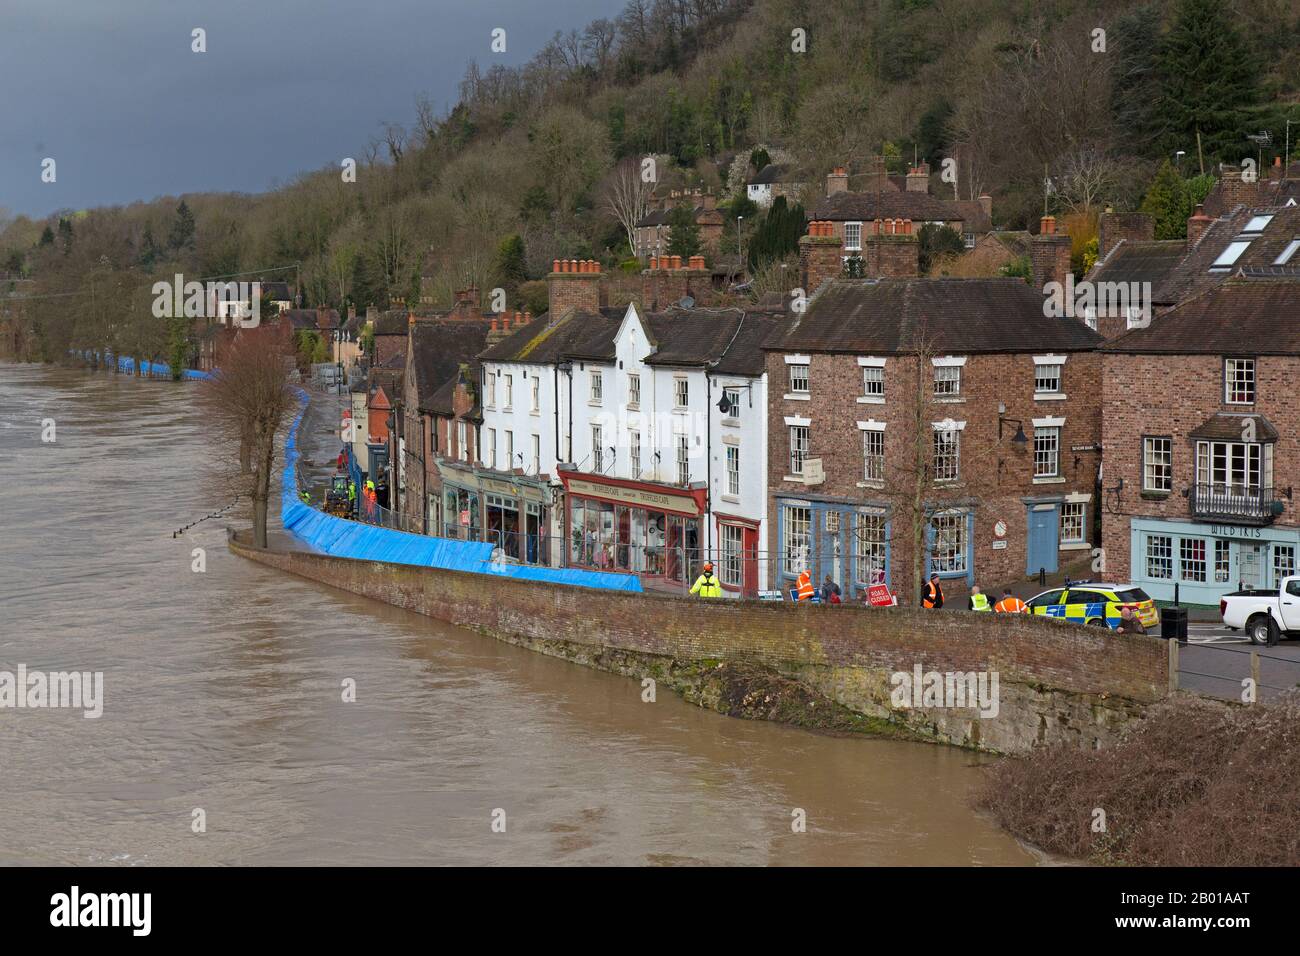 18th February 2020. The River Severn flooding in Ironbridge, Shropshire, England. A temporary flood barrier struggles to hold back the River, which has reached its highest point for 20 years, threatening homes and businesses along the River banks of the Ironbridge Gorge. The Ironbridge Gorge is a World Heritage Site. Stock Photo